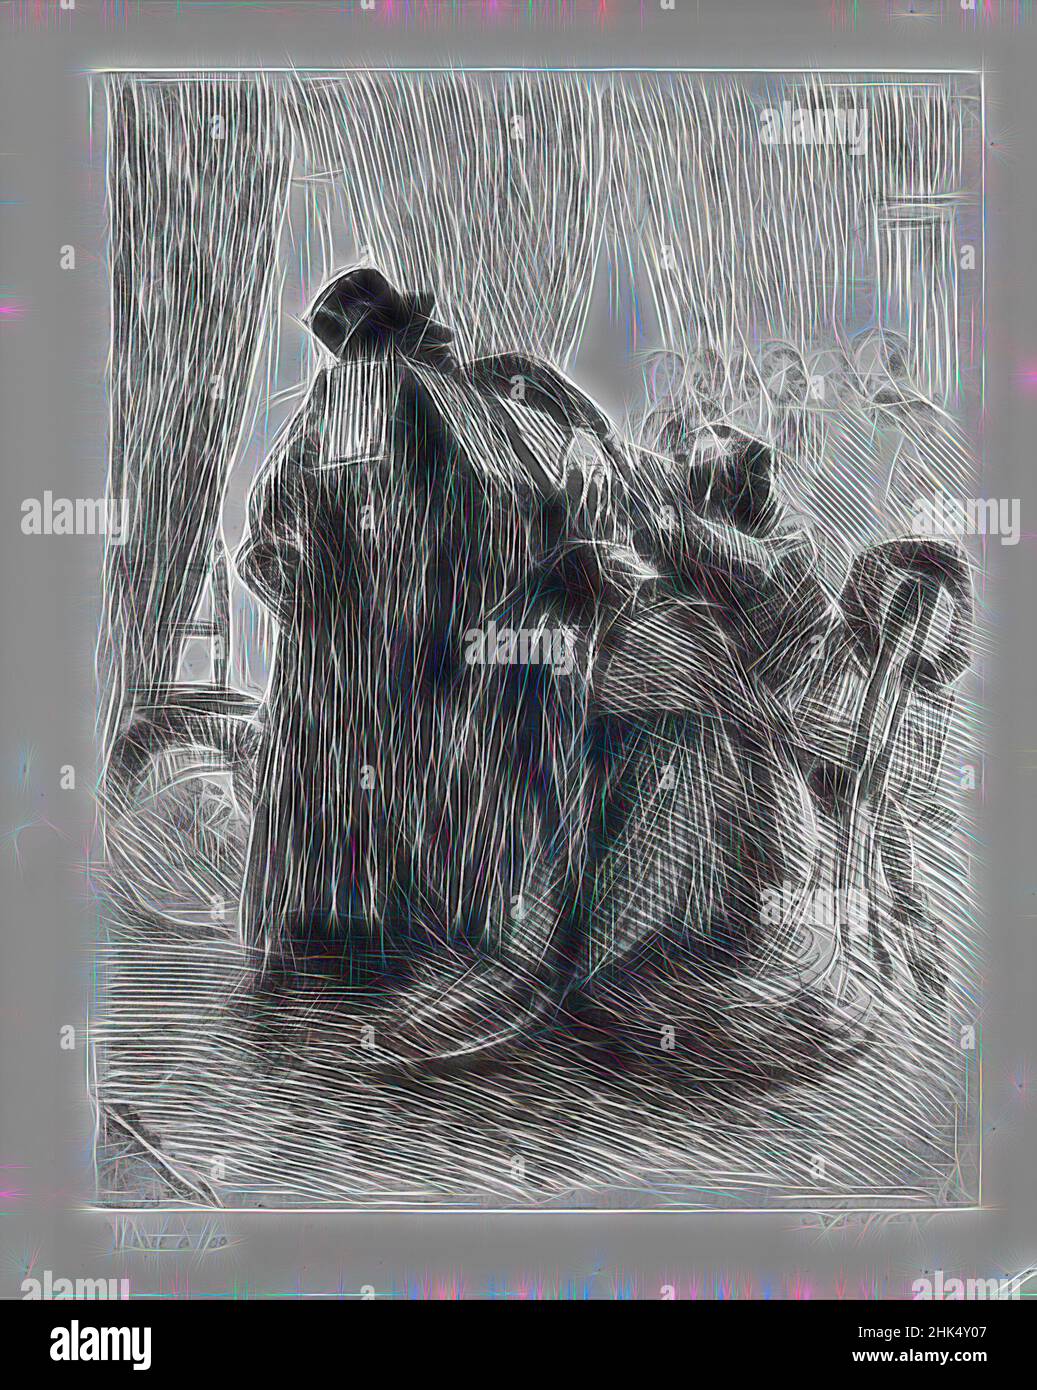 Inspired by Mourning, Le Deuil, Albert Besnard, French, 1849-1934, Etching on laid paper, ca. 1886, 12 7/16 x 9 3/4 in., 31.6 x 24.7 cm, Reimagined by Artotop. Classic art reinvented with a modern twist. Design of warm cheerful glowing of brightness and light ray radiance. Photography inspired by surrealism and futurism, embracing dynamic energy of modern technology, movement, speed and revolutionize culture Stock Photo